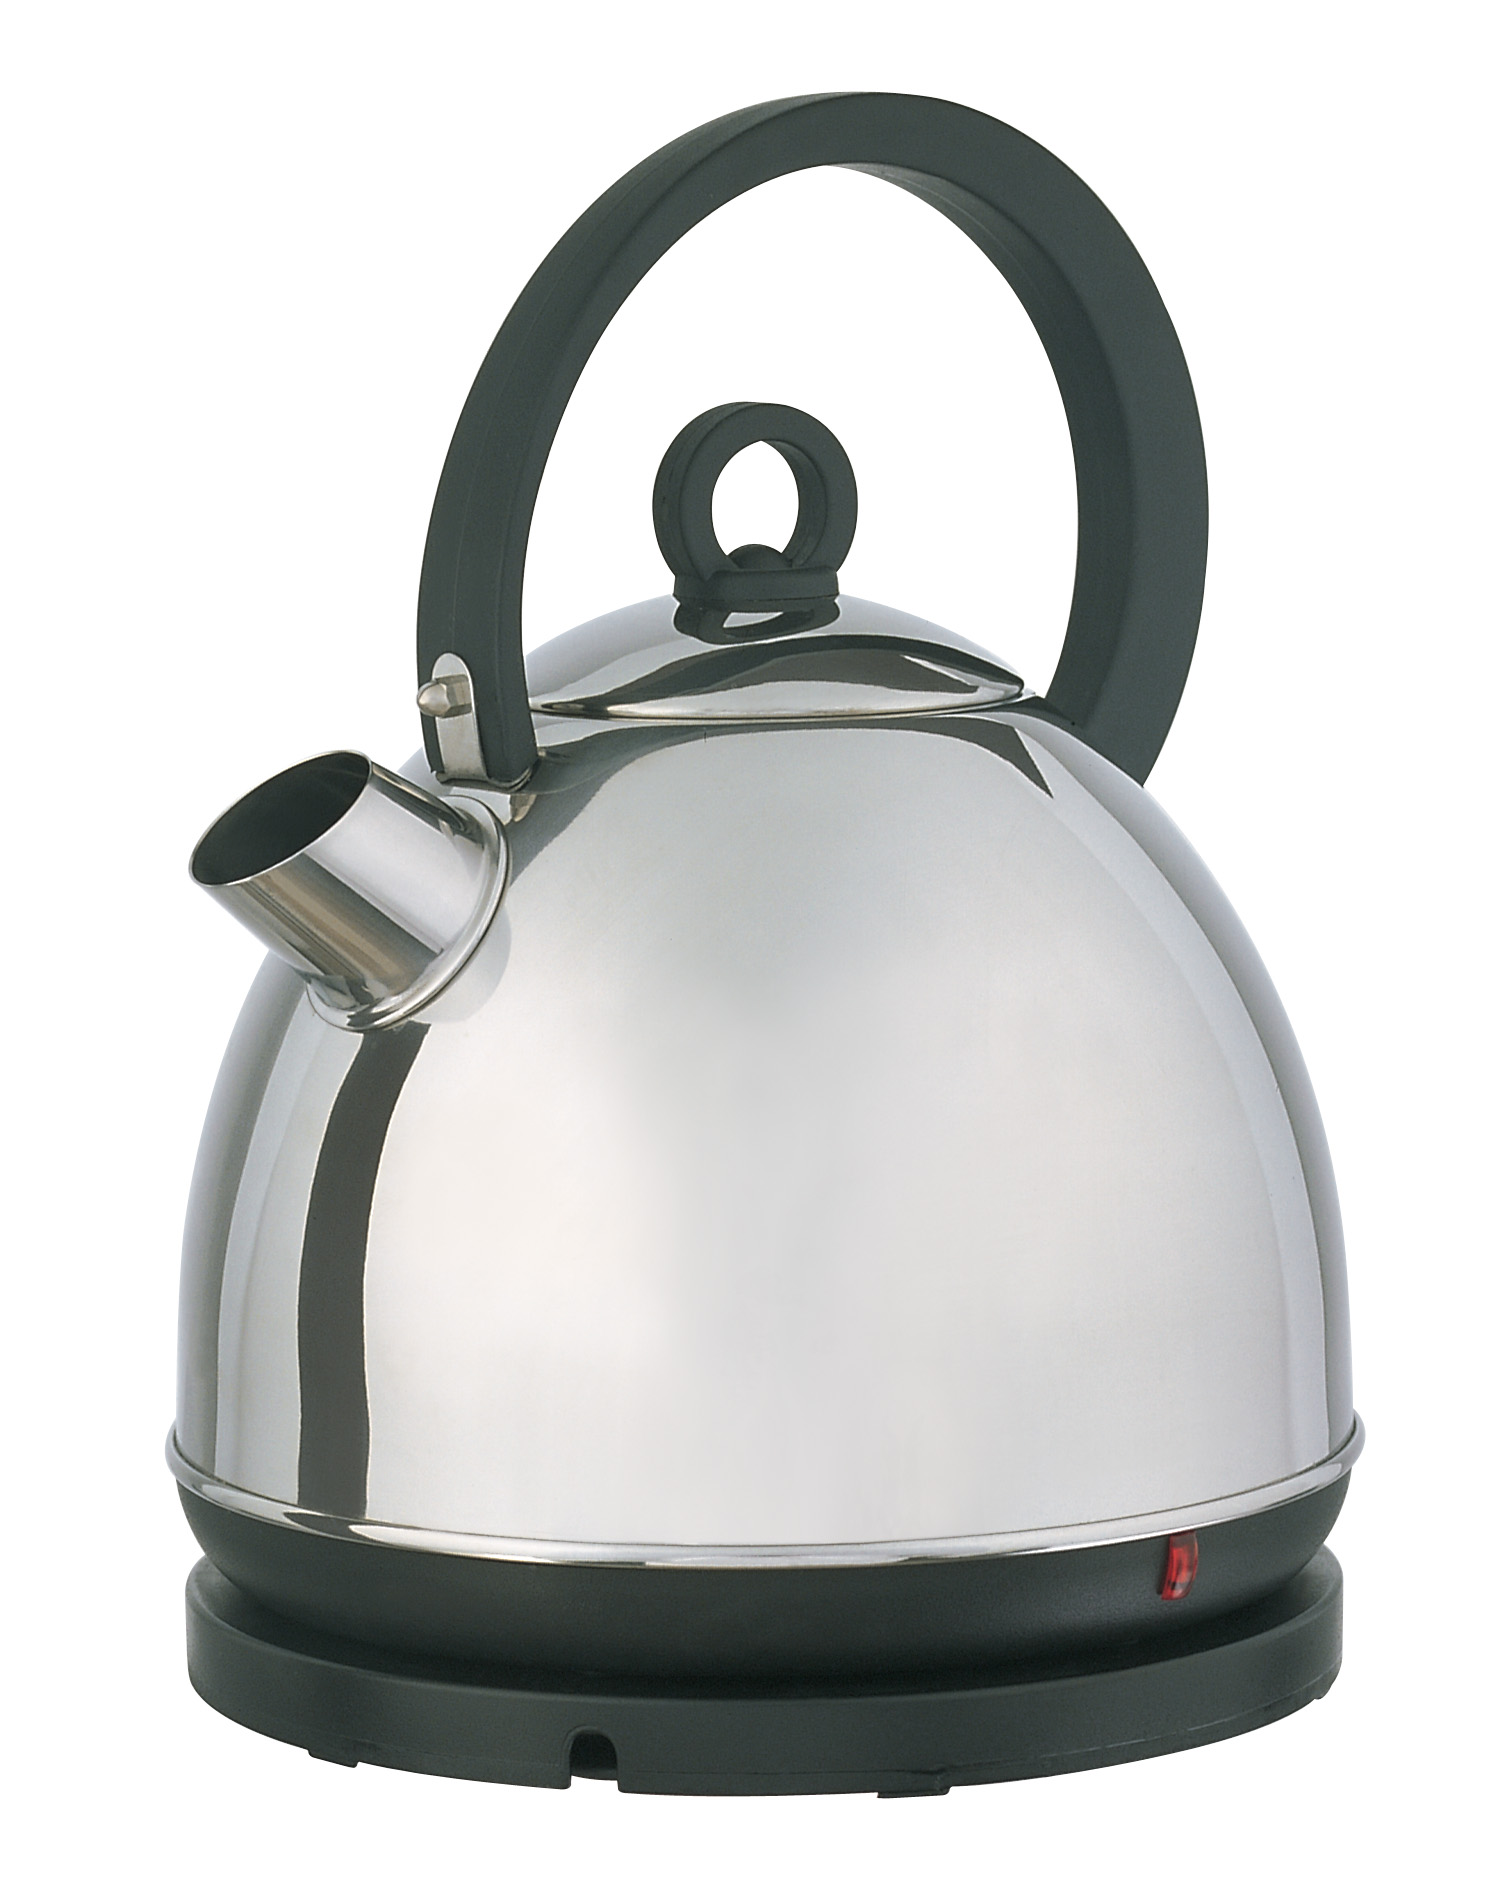 Stainless steel electric kettle 220V~2000W,120V~1500W,1.7L